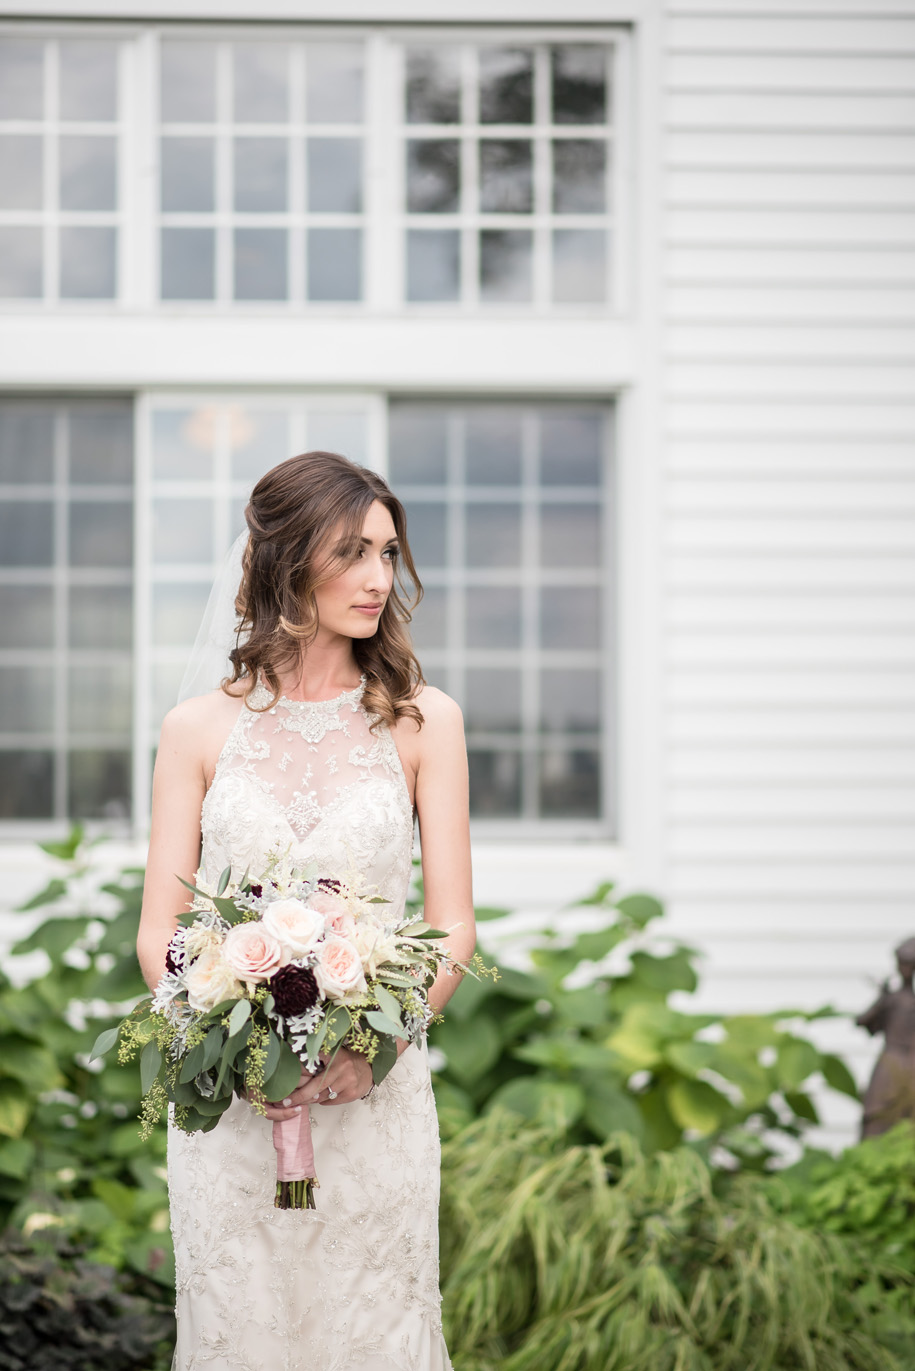 Rustic Ann Arbor Wedding with Garden Rose bouquet of pinks, greens, and wine.